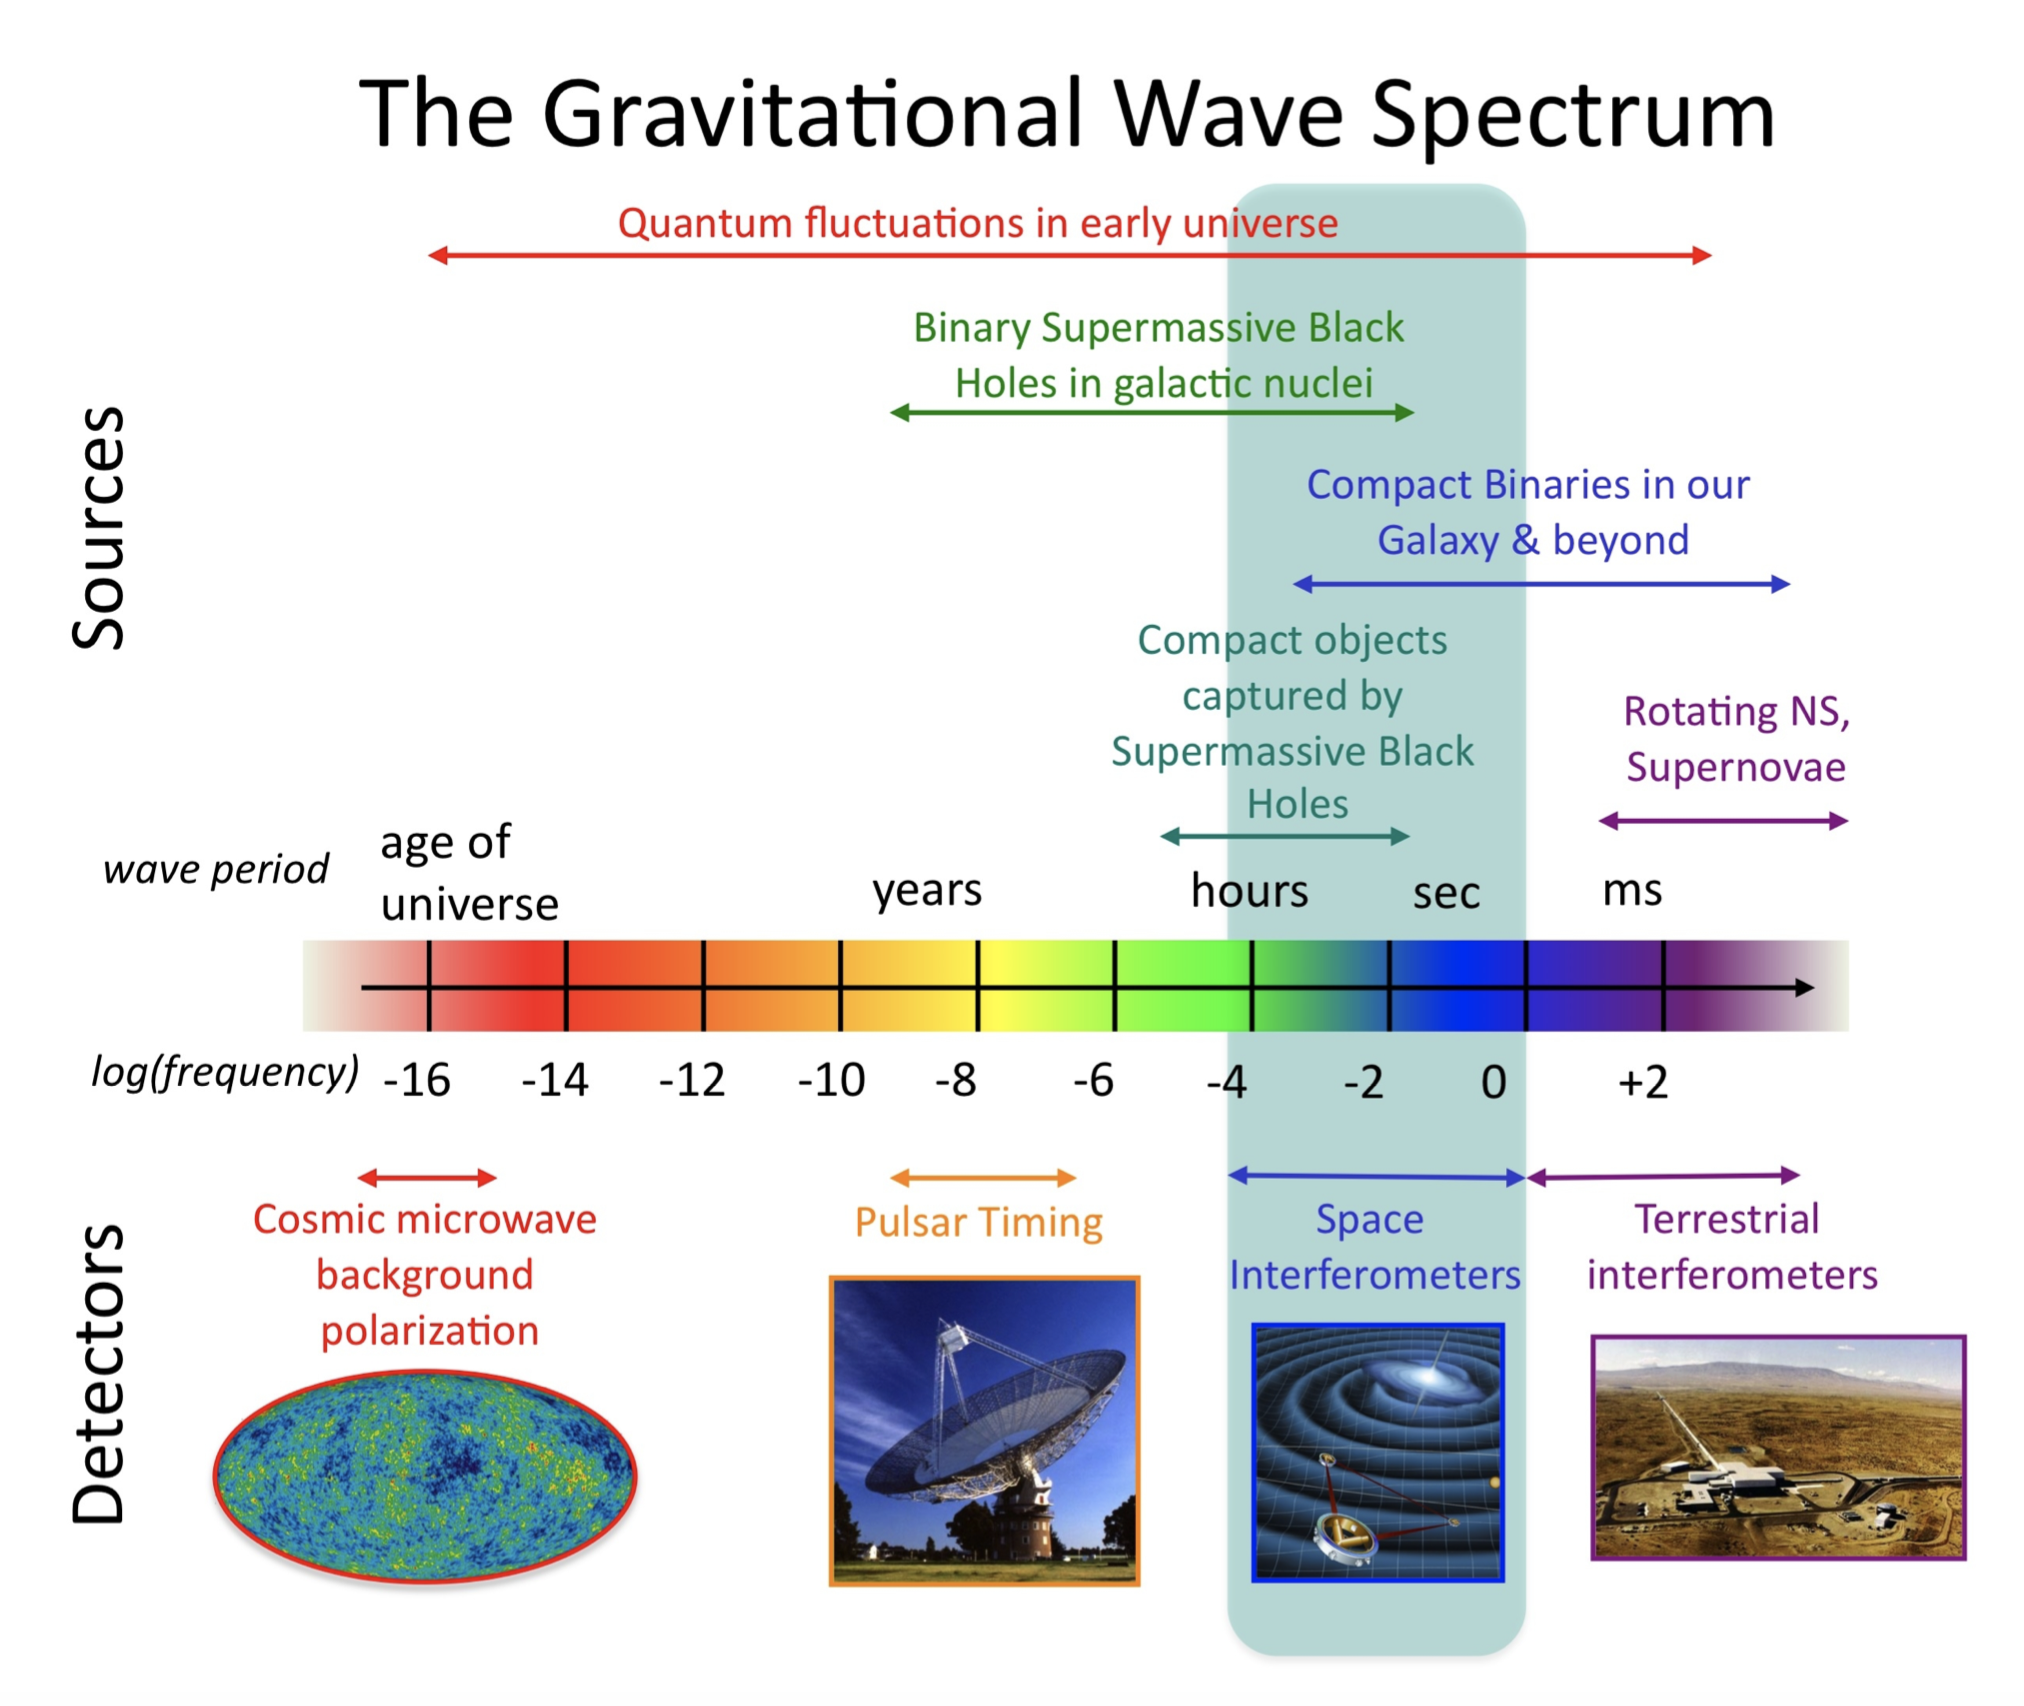 Gravitational wave spectrum showing wavelength and frequency along with some anticipated sources and the kind of detectors one might use. Credit: NASA Goddard Space Flight Center.